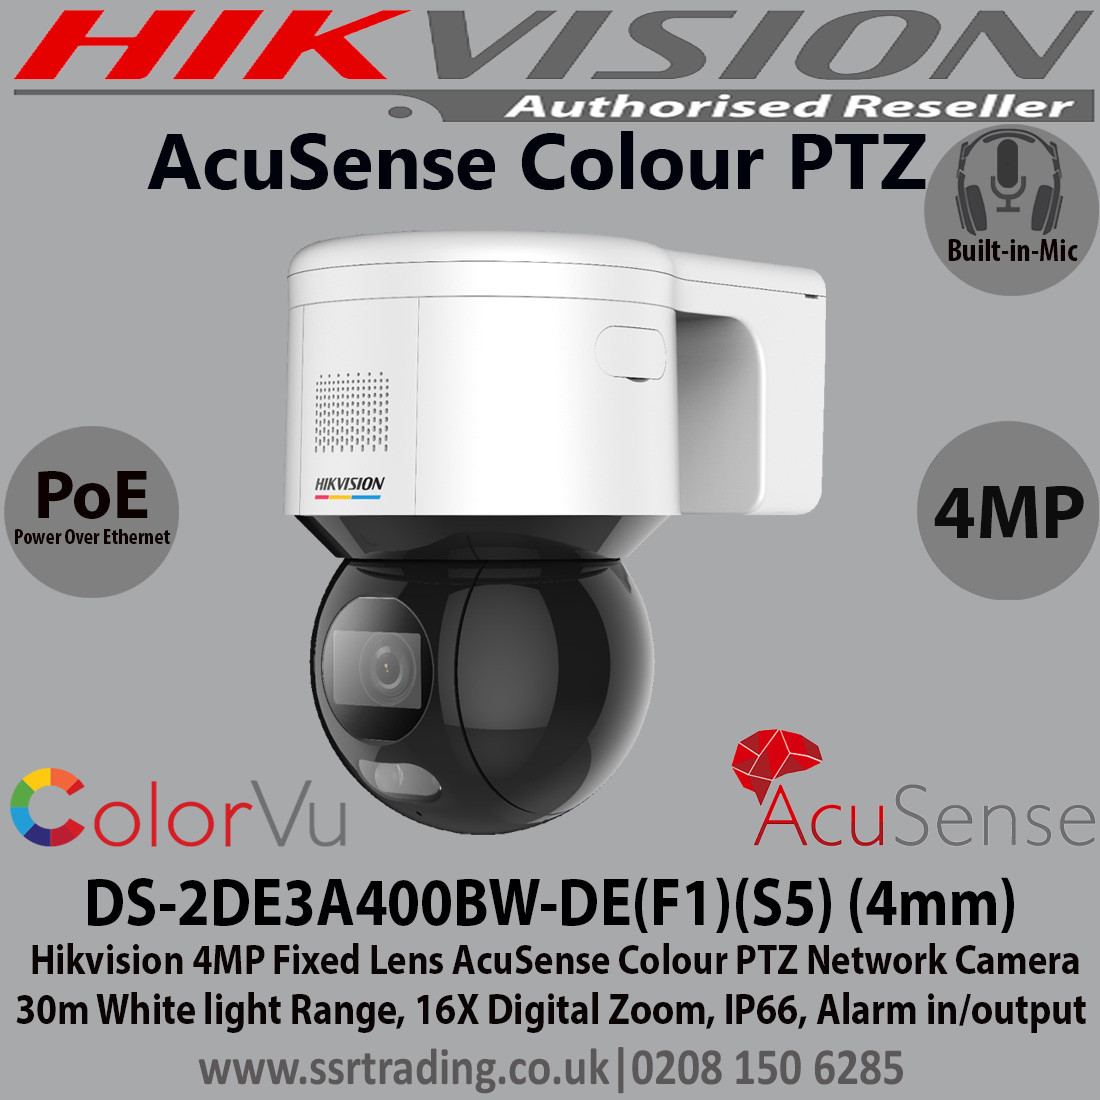 Hikvision 4mp 4mm Fixed Lens Acusense Colour Ptz Ip Poe Network Cctv Camera 30m White Light Range Ip66 Wdr H 265 Supports On Board Storage Face Capture Built In Microphone And Speaker Alarm